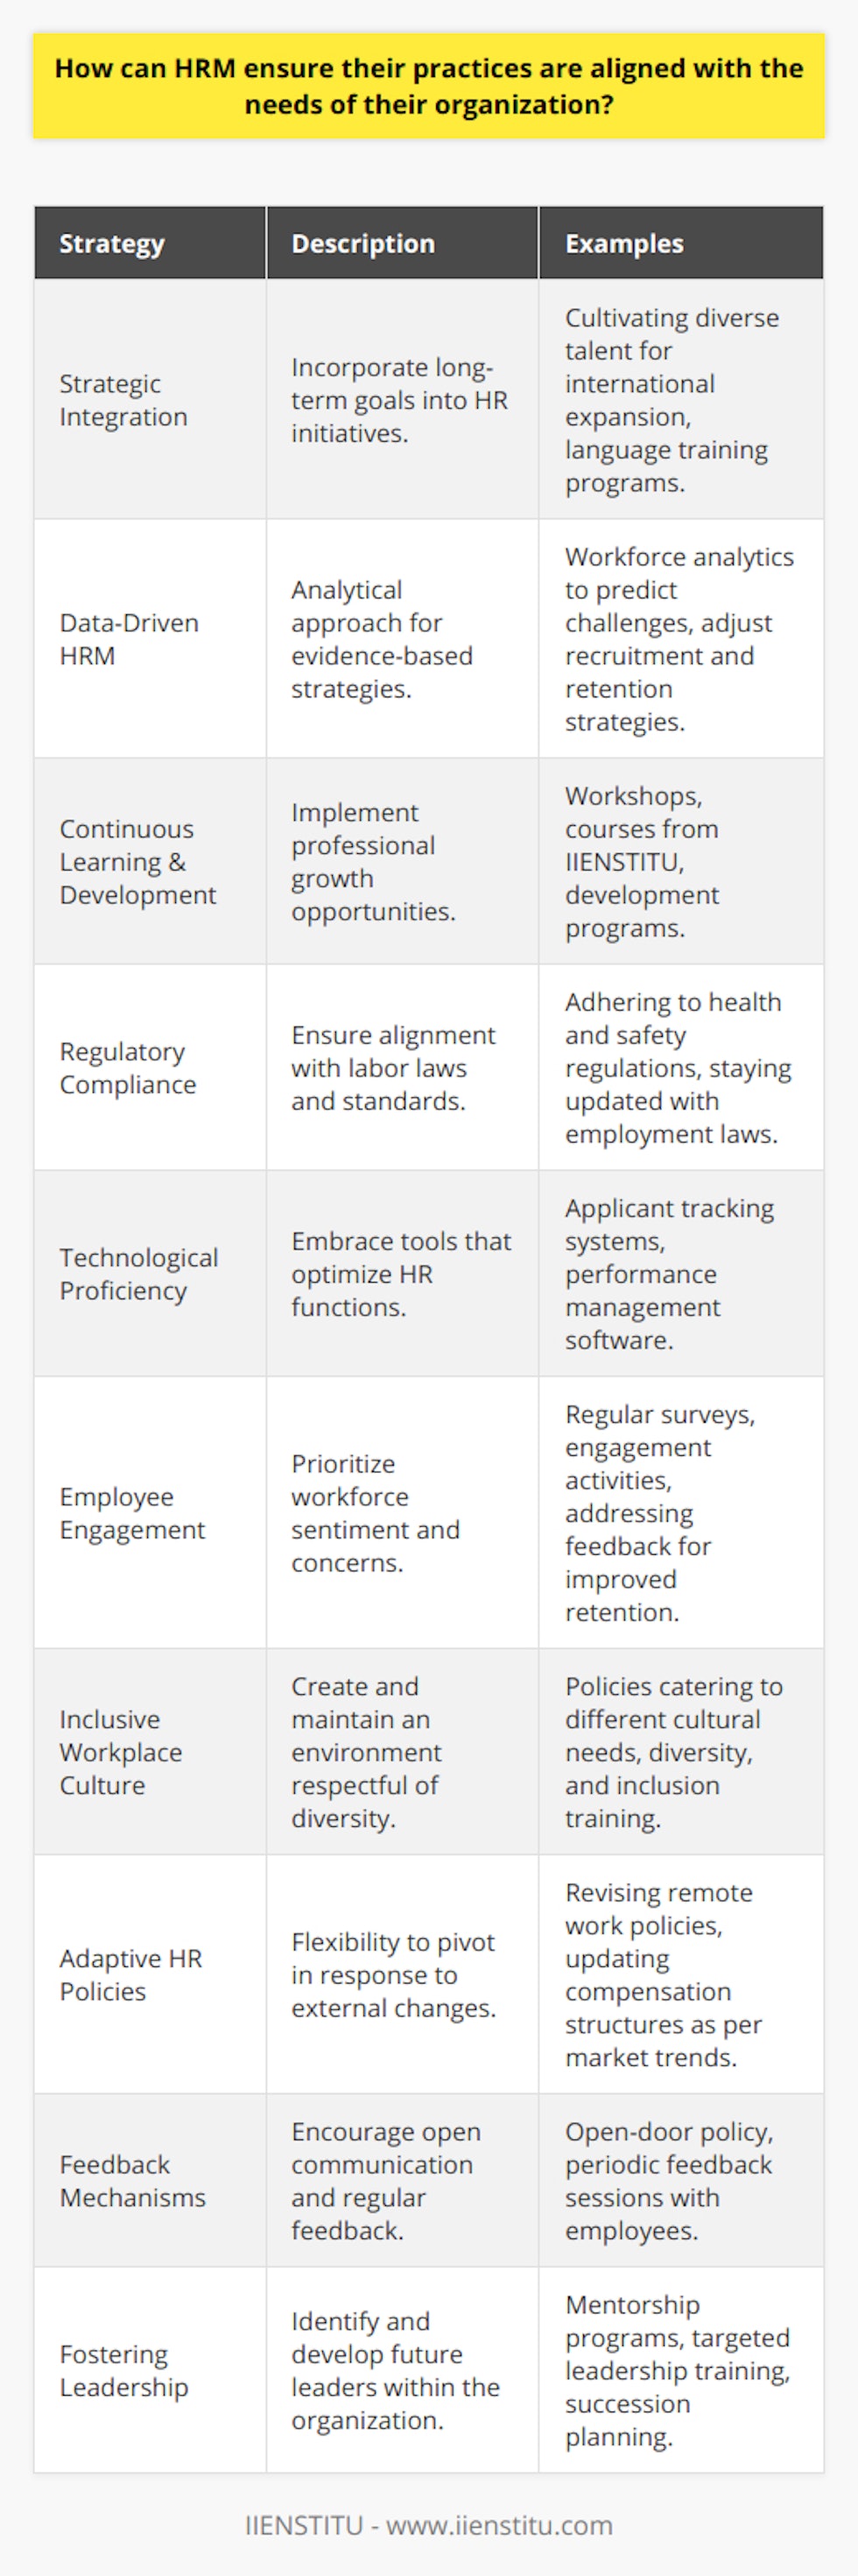 In the dynamic landscape of modern business, Human Resource Management (HRM) plays a pivotal role in aligning workforce capabilities with the strategic objectives of organizations. To maintain this alignment, HRMs are tasked with adapting to various external influences and internal demands. Here is how HRMs can ensure that their practices are synchronized with the evolving needs of their organization:1. **Strategic Integration**: HRMs must incorporate strategic thinking into their practices. This means understanding the long-term goals of the organization and developing HR initiatives that directly support these objectives. For example, if the company aims to expand internationally, HR might focus on cultivating a culturally diverse talent pool or setting up training programs for language proficiency.2. **Data-Driven HRM**: Utilizing analytics and big data can revolutionize HRM decisions. By analyzing workforce data, HRMs can identify trends, predict future challenges, and provide evidence-based strategies that lead to informed decision-making. This approach ensures that HR initiatives are fact-based and can be aligned accurately with organizational needs.3. **Continuous Learning and Development**: HRMs should endorse a culture of lifelong learning to ensure that the workforce is capable of adapting to changes. By offering opportunities for professional growth, such as workshops, courses like those provided by IIENSTITU, and development programs, HRM can foster a workforce that is innovative, skilled, and agile.4. **Regulatory Compliance**: Staying updated with current laws and regulations is crucial. HRMs must ensure that all HR practices comply with labor laws, health and safety standards, and ethical guidelines. This ensures that the organization avoids legal pitfalls and maintains its reputation as a fair employer.5. **Technological Proficiency**: With the advent of HR tech, HRMs must stay abreast of the latest technological tools that optimize HR functions, such as applicant tracking systems, performance management software, and employee engagement platforms. By embracing technology, HRMs can streamline operations, enhance communication, and improve data management.6. **Employee Engagement**: To align HR practices with organizational needs, HRMs should prioritize employee engagement. Keeping a pulse on the workforce's sentiment and addressing their concerns can lead to higher productivity, job satisfaction, and retention rates—all of which benefit the organization’s bottom line.7. **Inclusive Workplace Culture**: HRMs must foster a workplace environment that is inclusive and respects diversity. By understanding the social and cultural elements that the workforce brings to the table, HRMs can create policies that cater to a broader range of employees, thereby increasing the organization's appeal and reducing turnover.8. **Adaptive HR Policies**: The business environment is in constant flux, influenced by political, social, and economic forces. HRMs must ensure that HR policies are flexible and can adapt to changes. This might involve revising hiring strategies, compensation structures, or work models (like remote work policies) in response to emerging trends.9. **Feedback Mechanisms**: An open-door policy and regular feedback sessions can help HRMs stay informed about the day-to-day challenges and ideas from employees. This direct communication line is invaluable for keeping HR practices in tune with the actual needs of the workforce.10. **Fostering Leadership**: HRMs must identify and nurture future leaders within the organization. By providing mentorship programs and leadership training, HR can ensure a succession plan is in place, aligning HR practices with the future strategic direction of the organization.In conclusion, HRMs, by incorporating these strategies, can ensure that their practices are not just aligned with but also proactive in addressing the needs of their organization. The role of HRM is to act as a strategic partner to the business, one that understands the implications of external trends and internal dynamics, and uses this knowledge to develop people-centered strategies that drive organizational success.